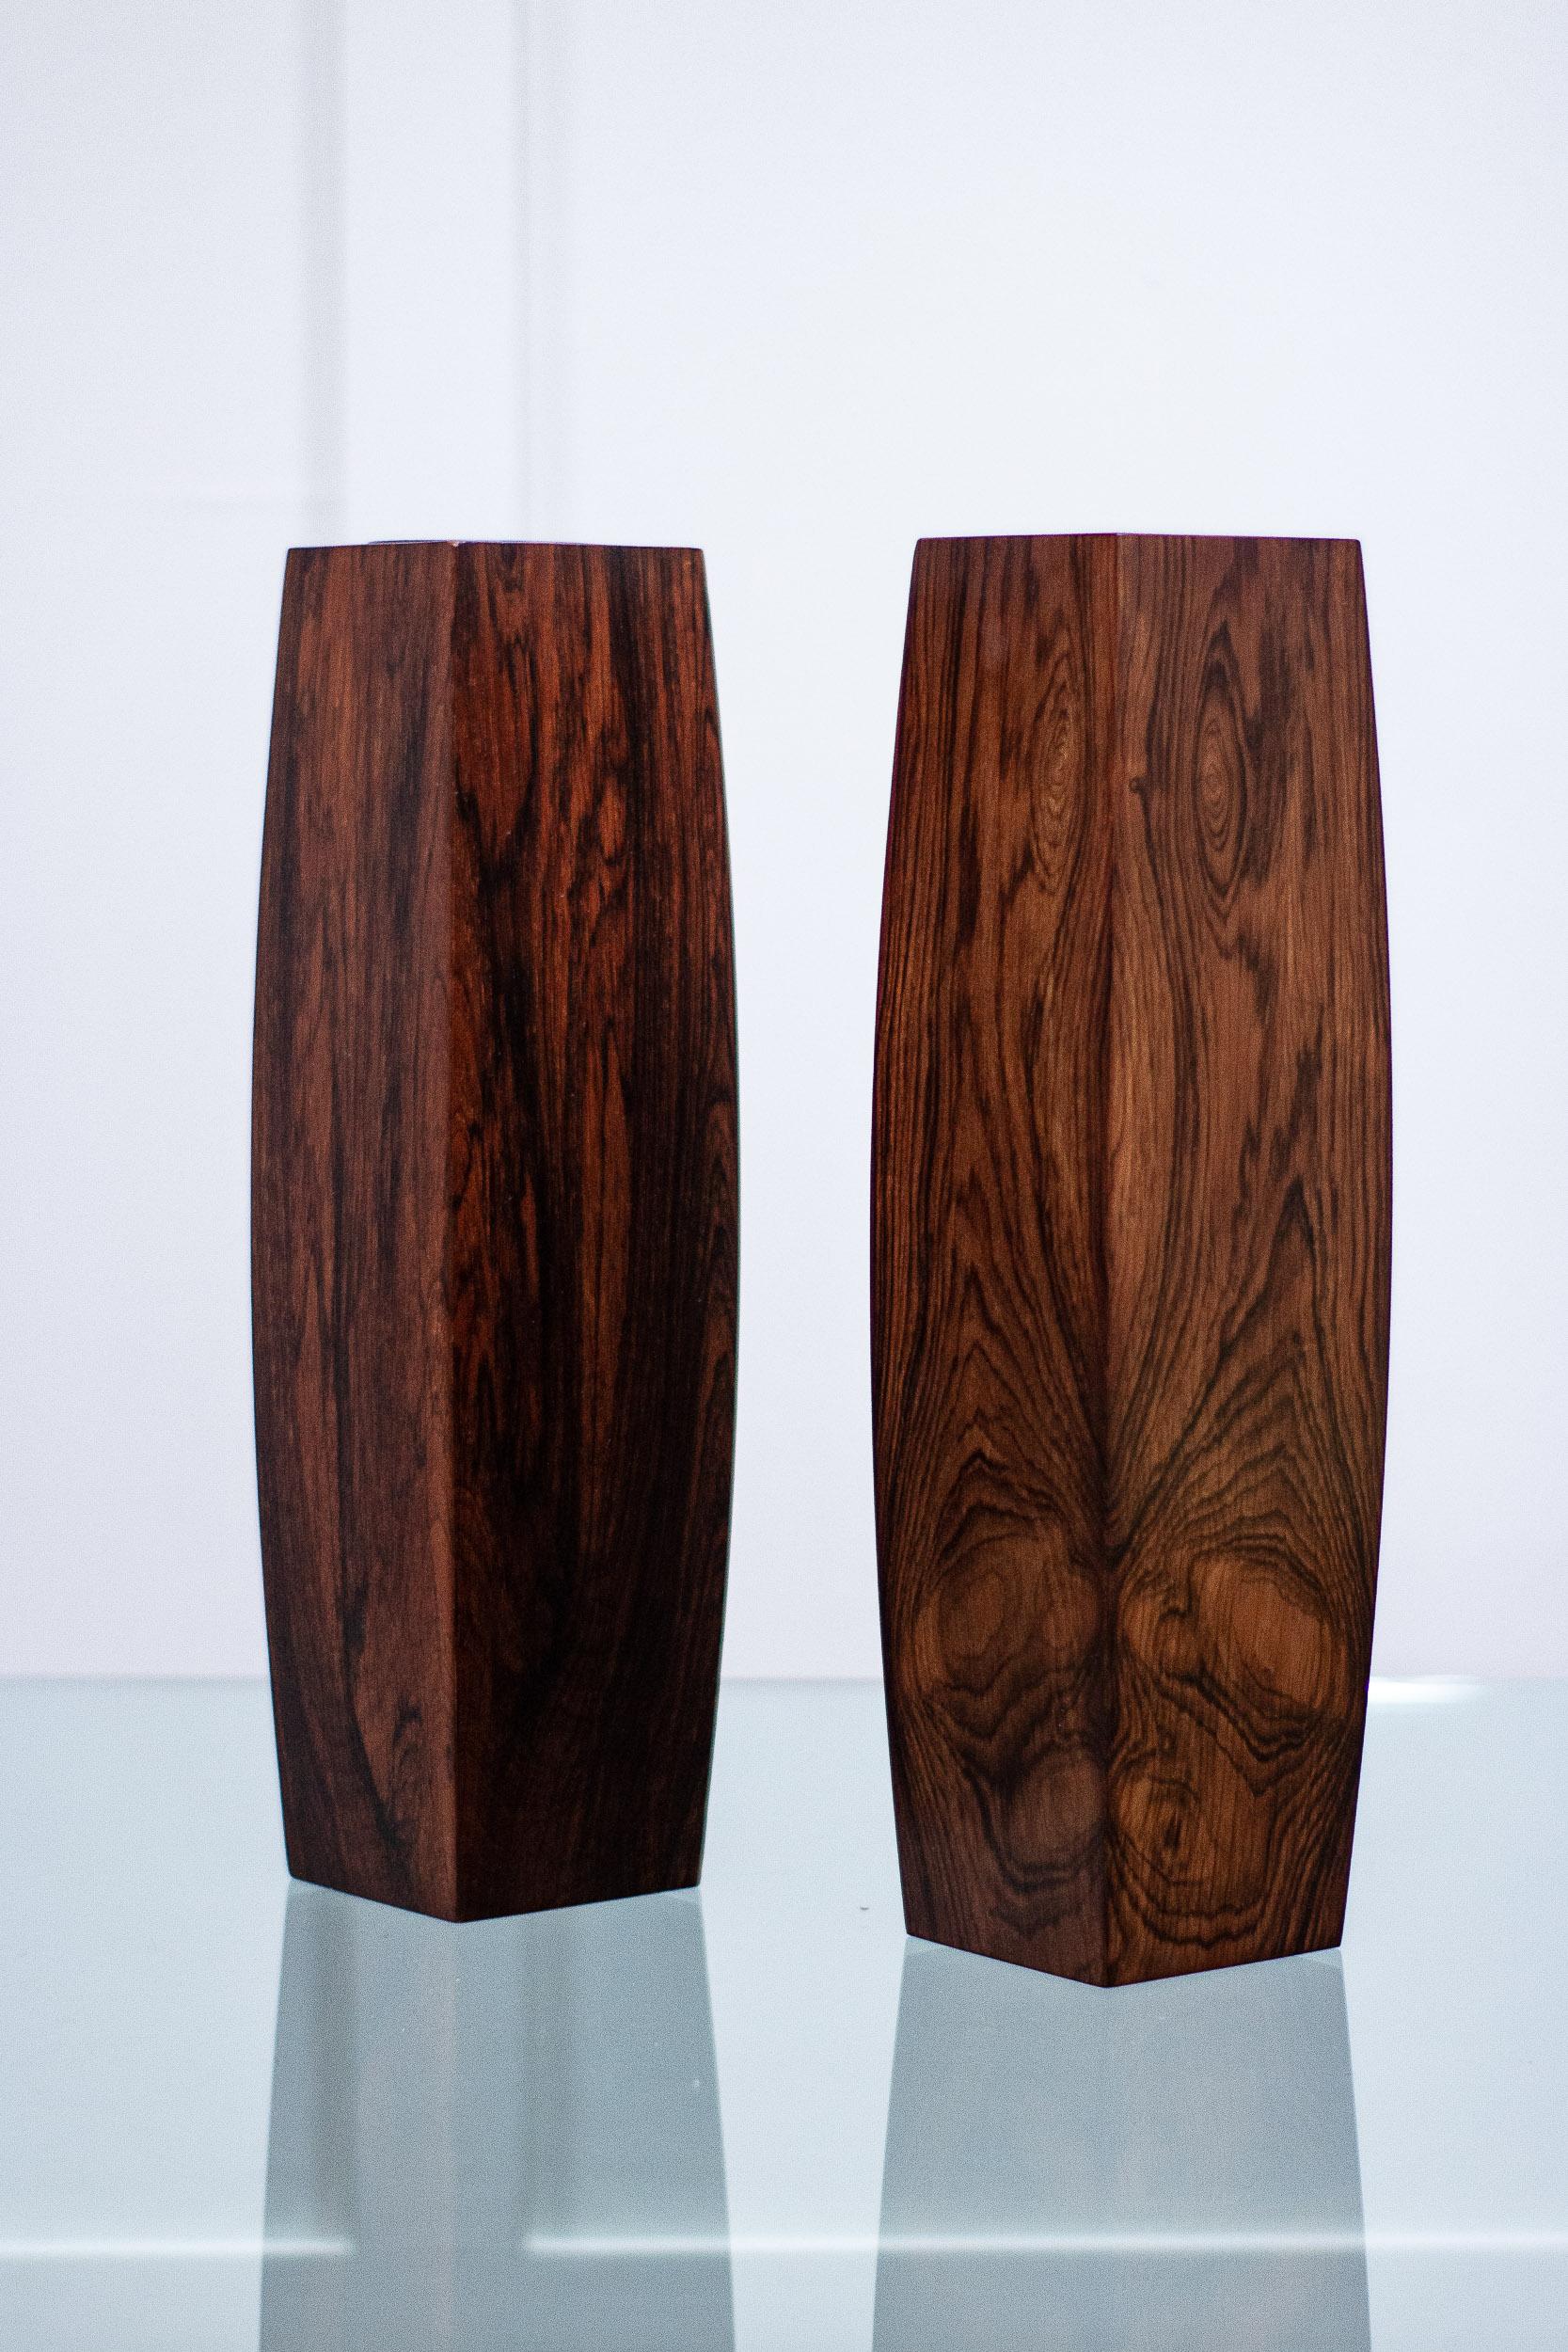 A pair of Danish rosewood vases, 1960s. 

The vases are made of ply with a rosewood veneer and a plastic internal cylinder. 

Makers mark stamped on the base, but unreadable.